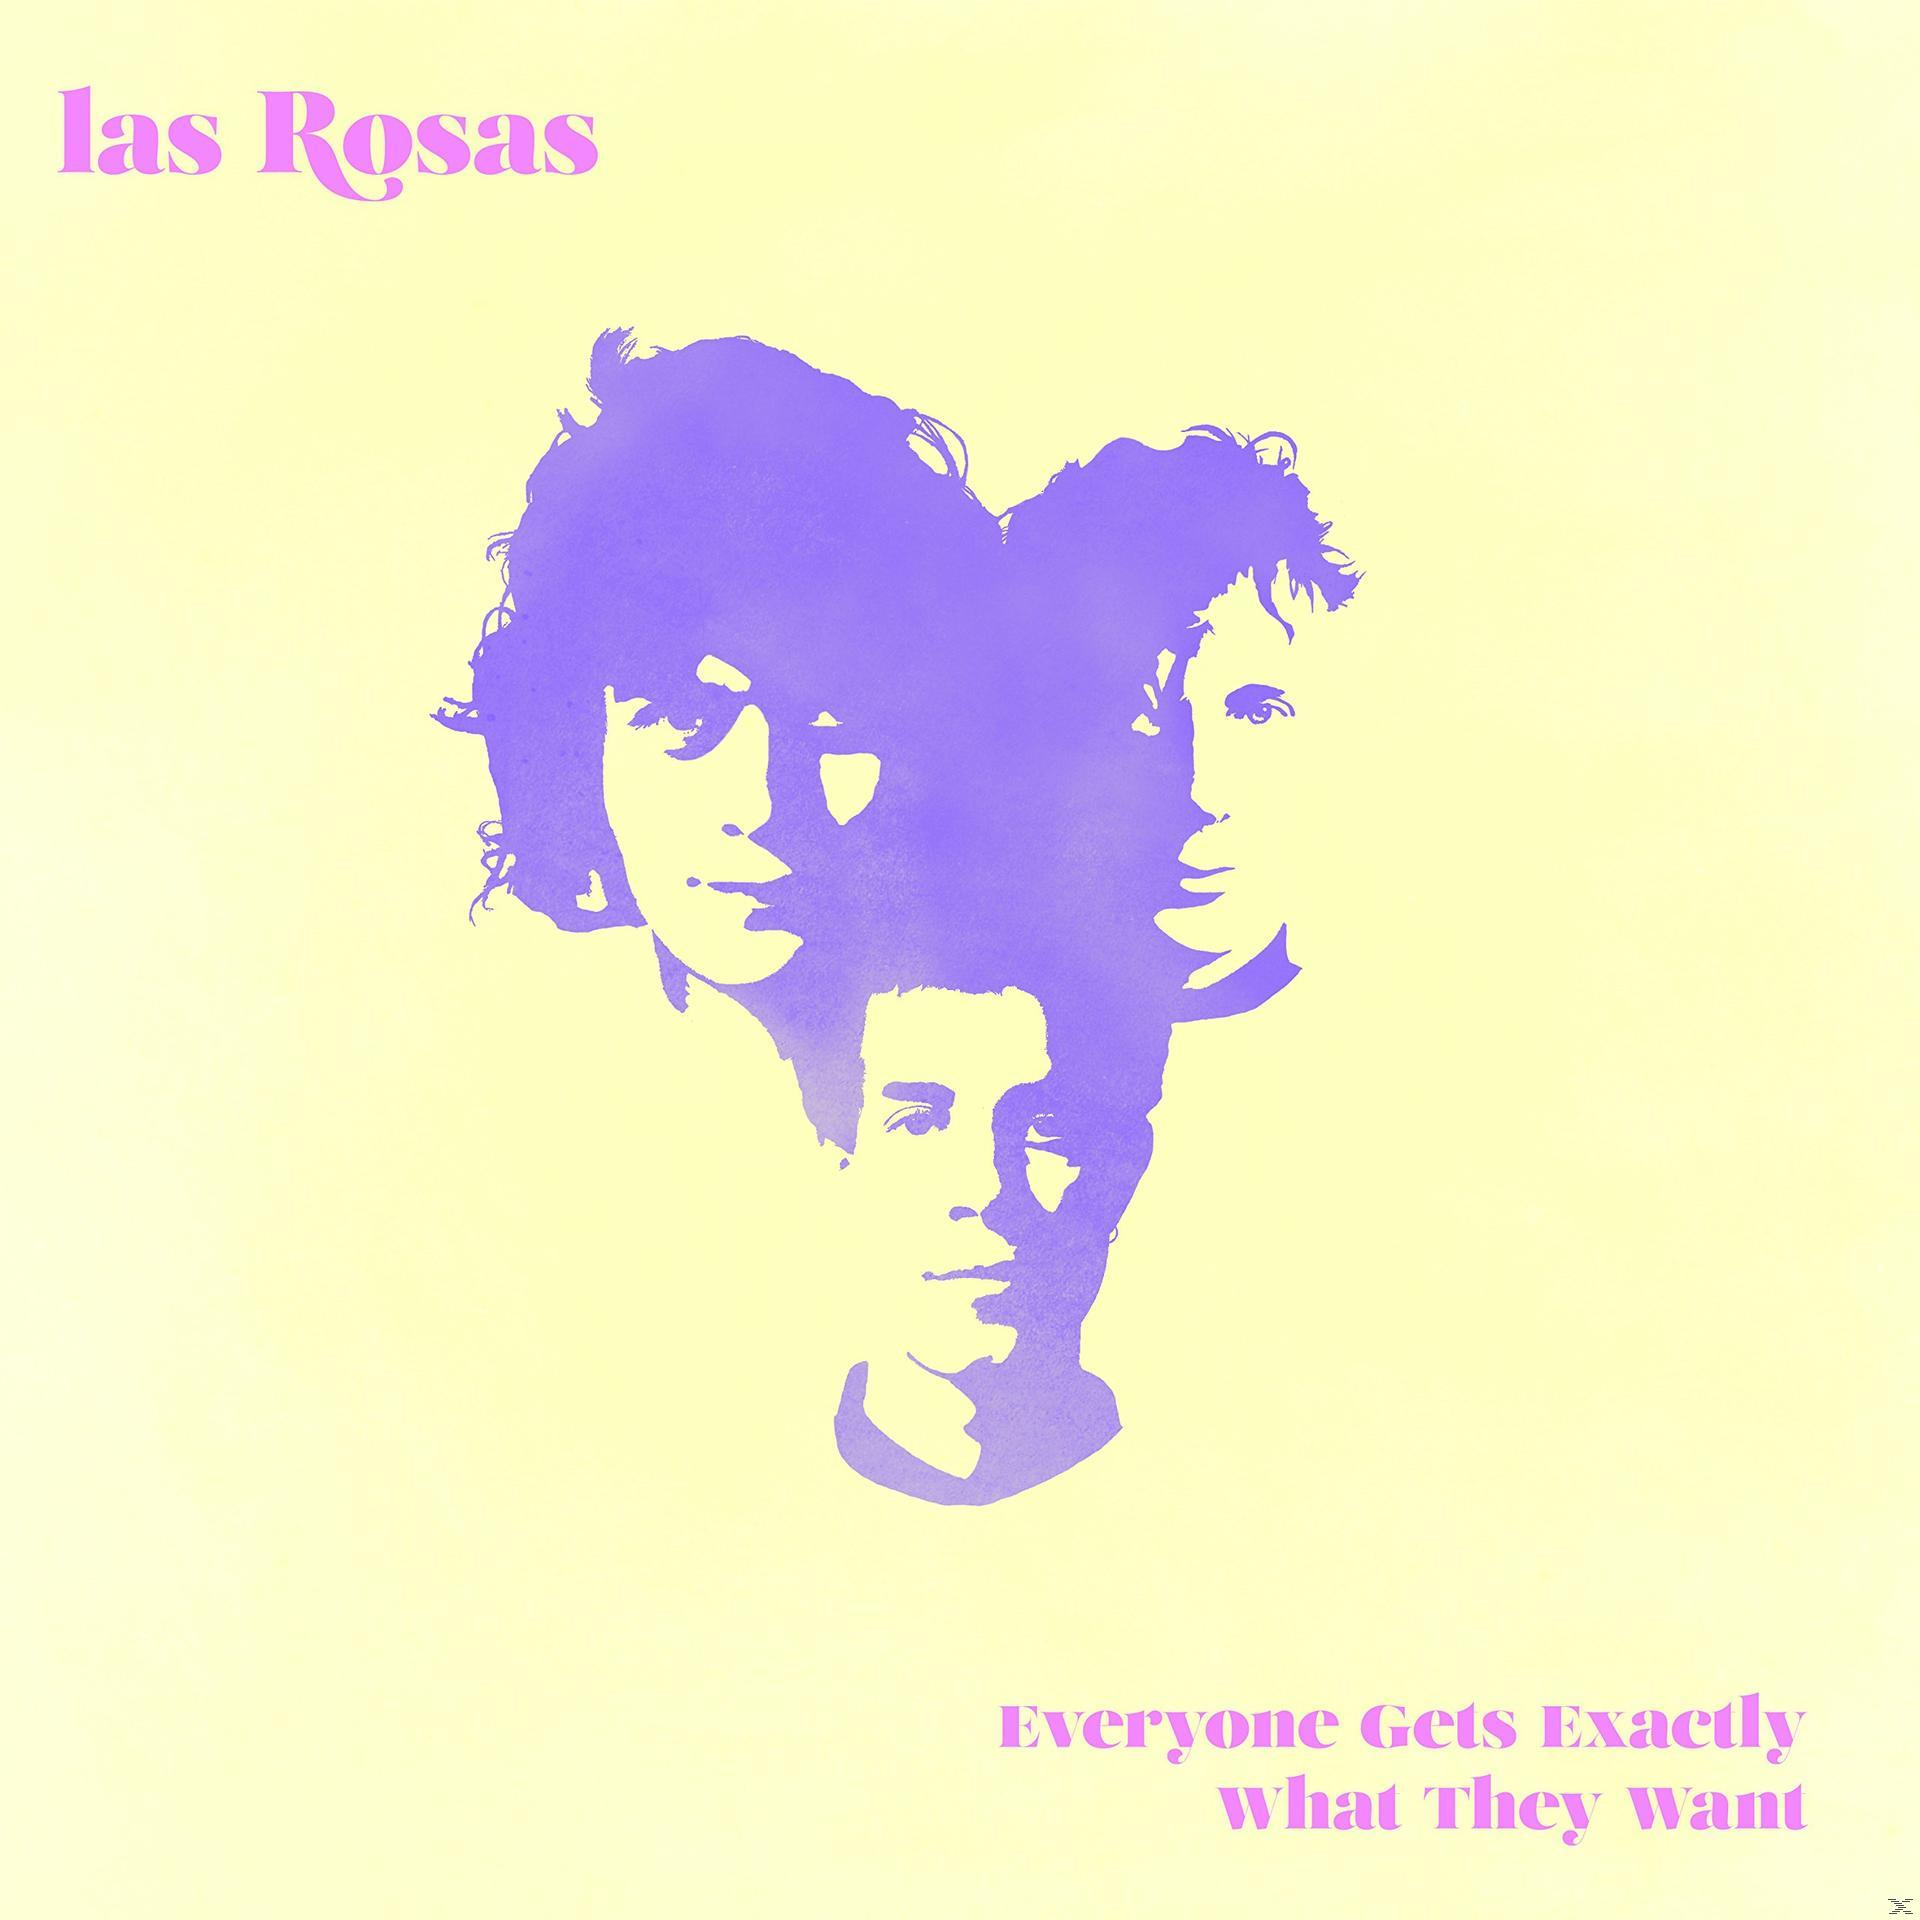 Las Rosas - Want Gets (Vinyl) - Everyone Exactly They What